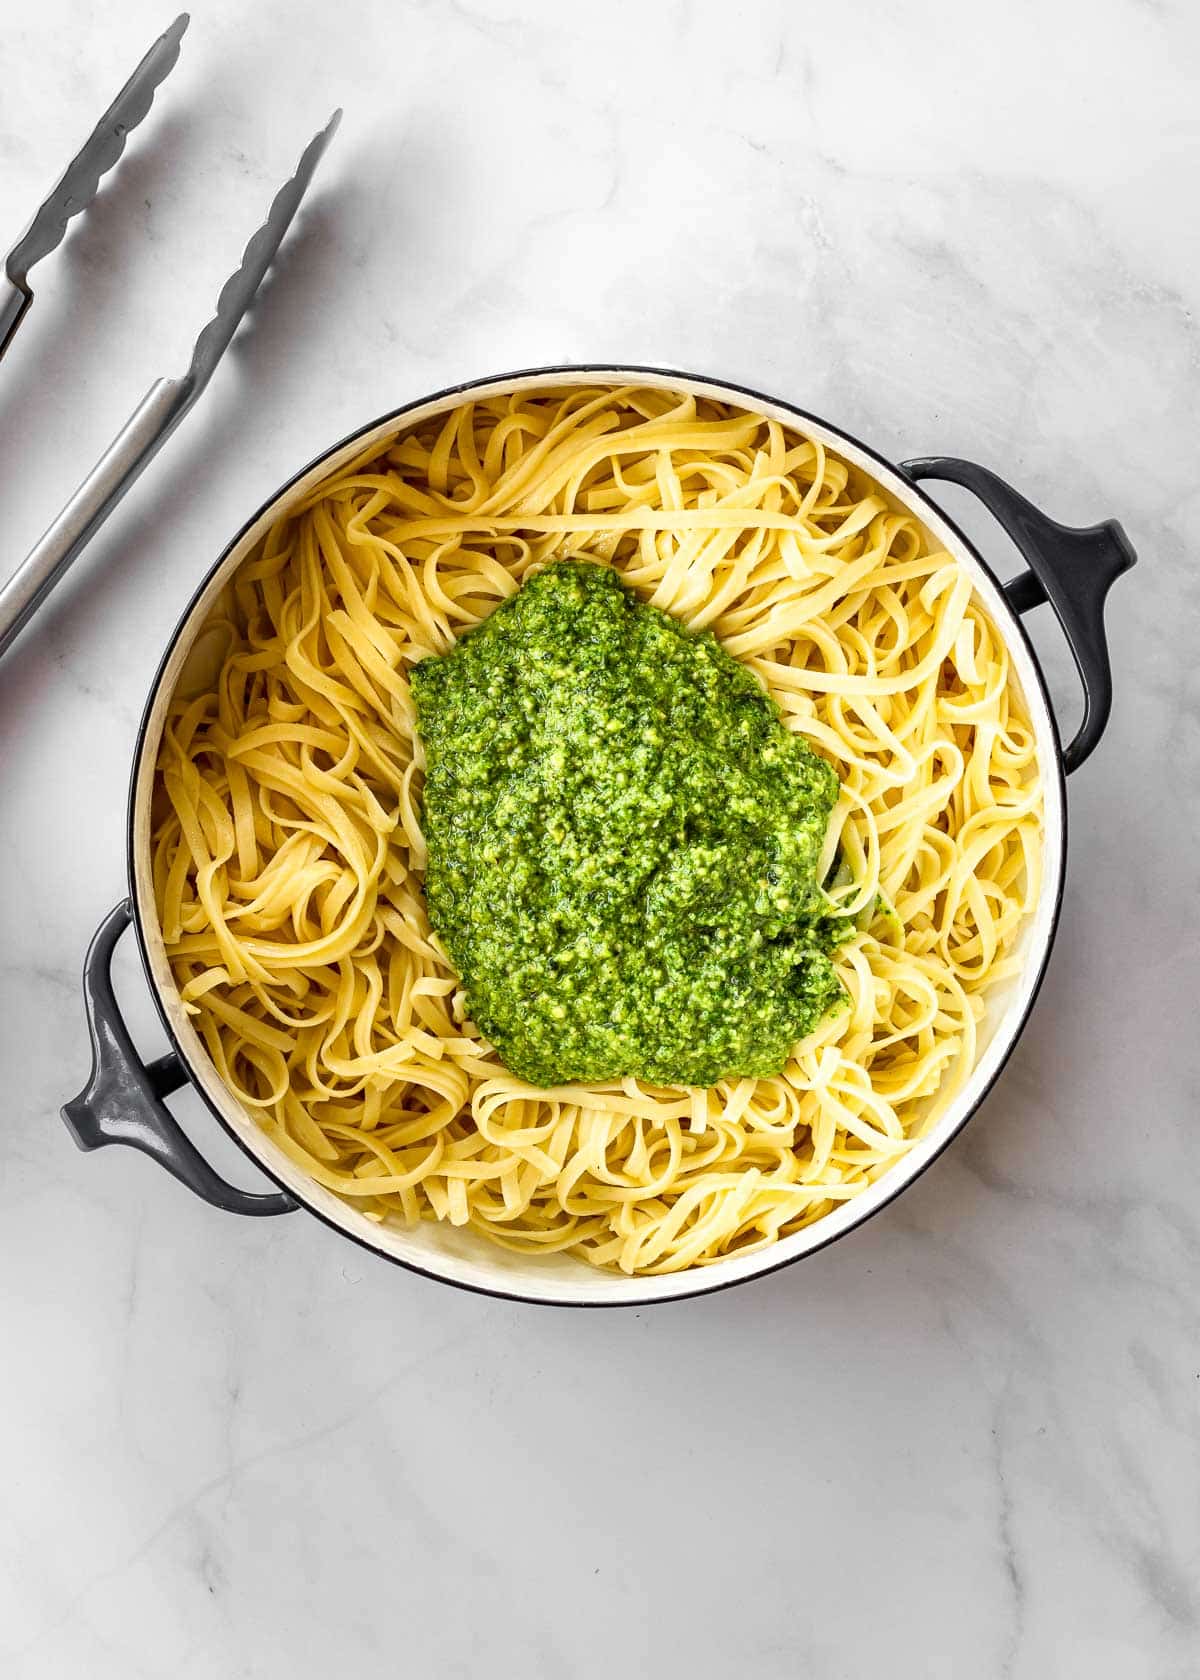 Large pot of cooked pasta with fresh basil pesto on top.